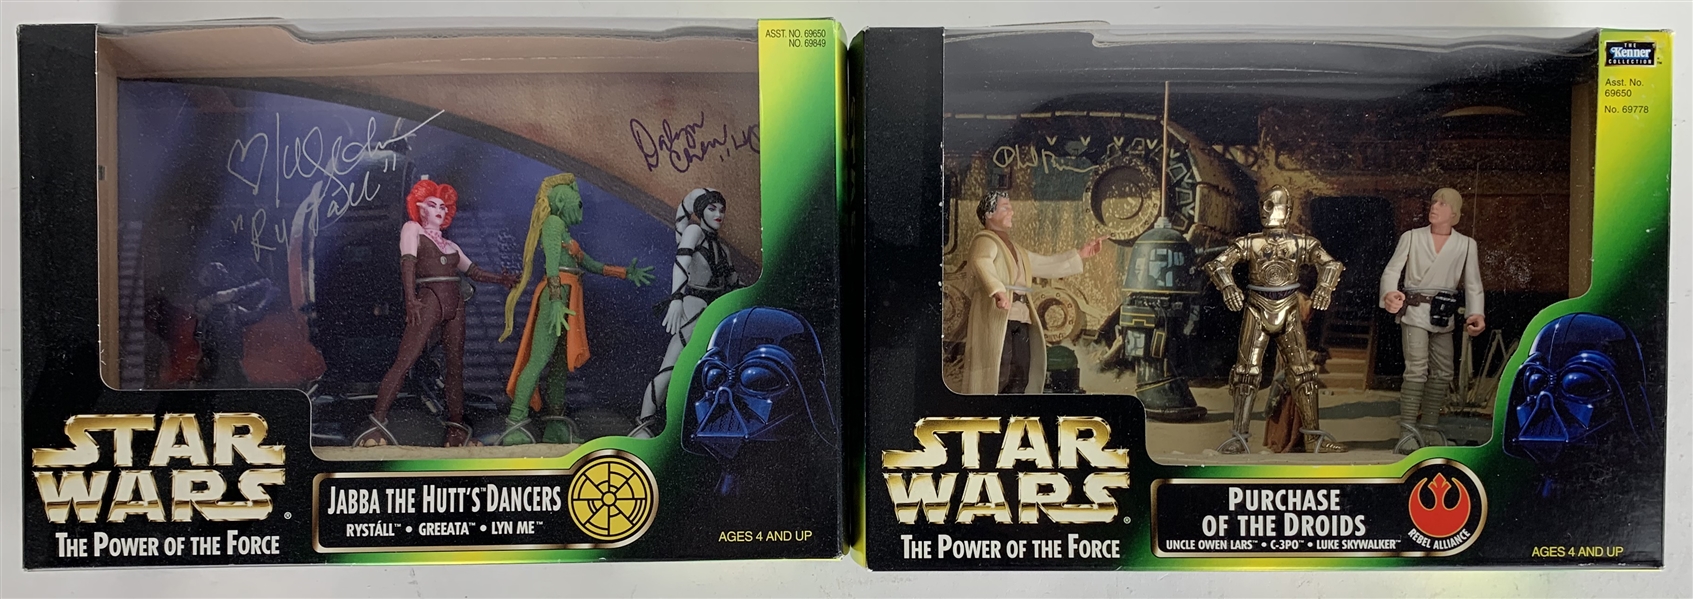 Lot of Two (2) The Power of the Force Signed Kenner Toys w/ Phil Brown! (Beckett/BAS Guaranteed)